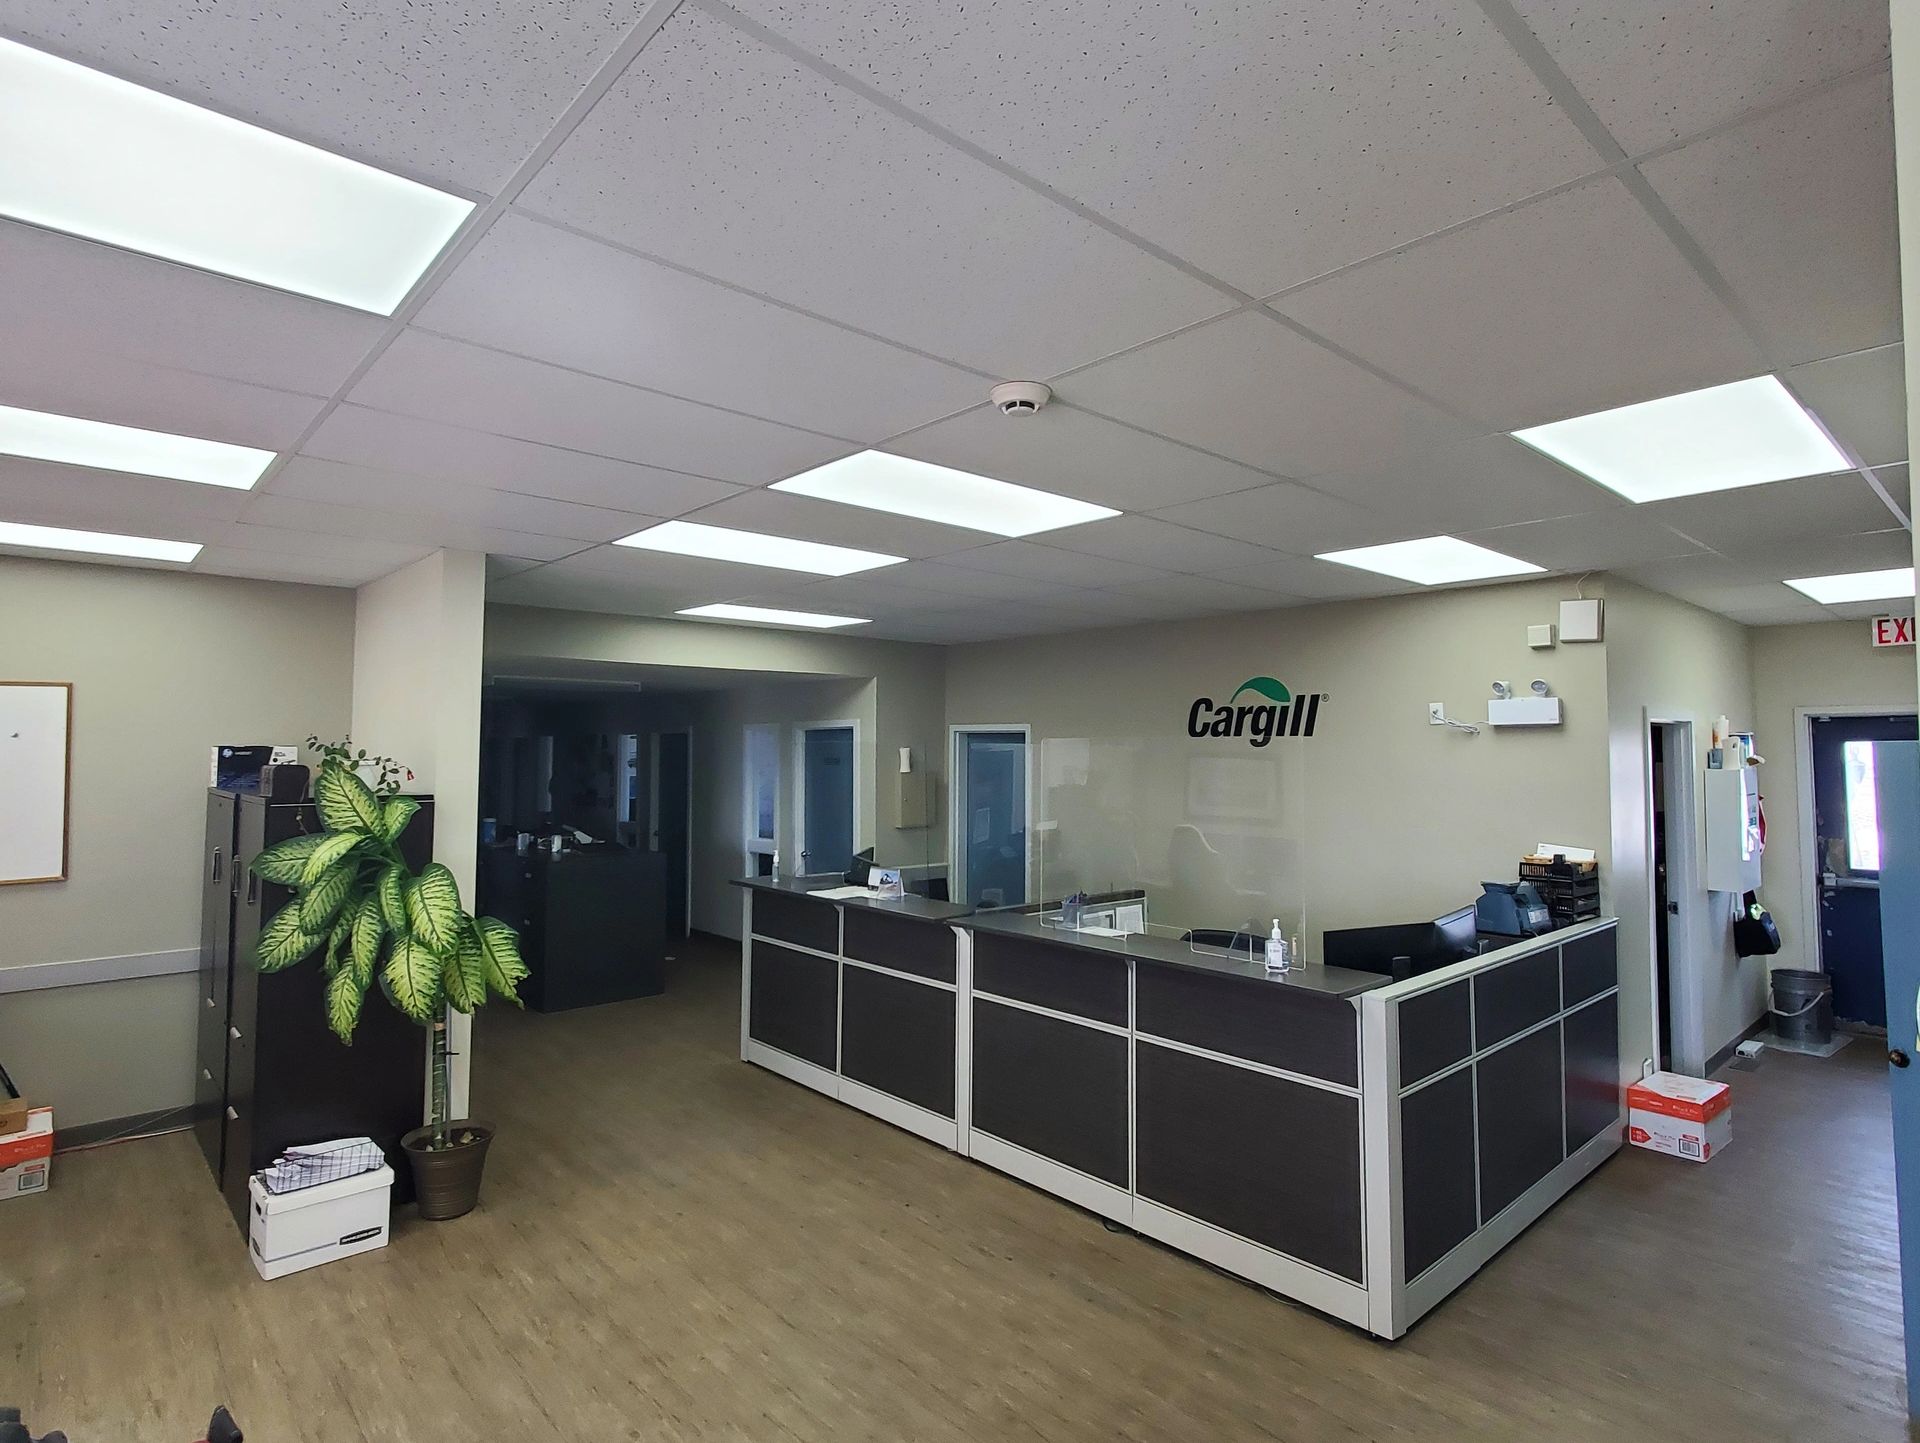 Commercial LED Lighting Upgrades